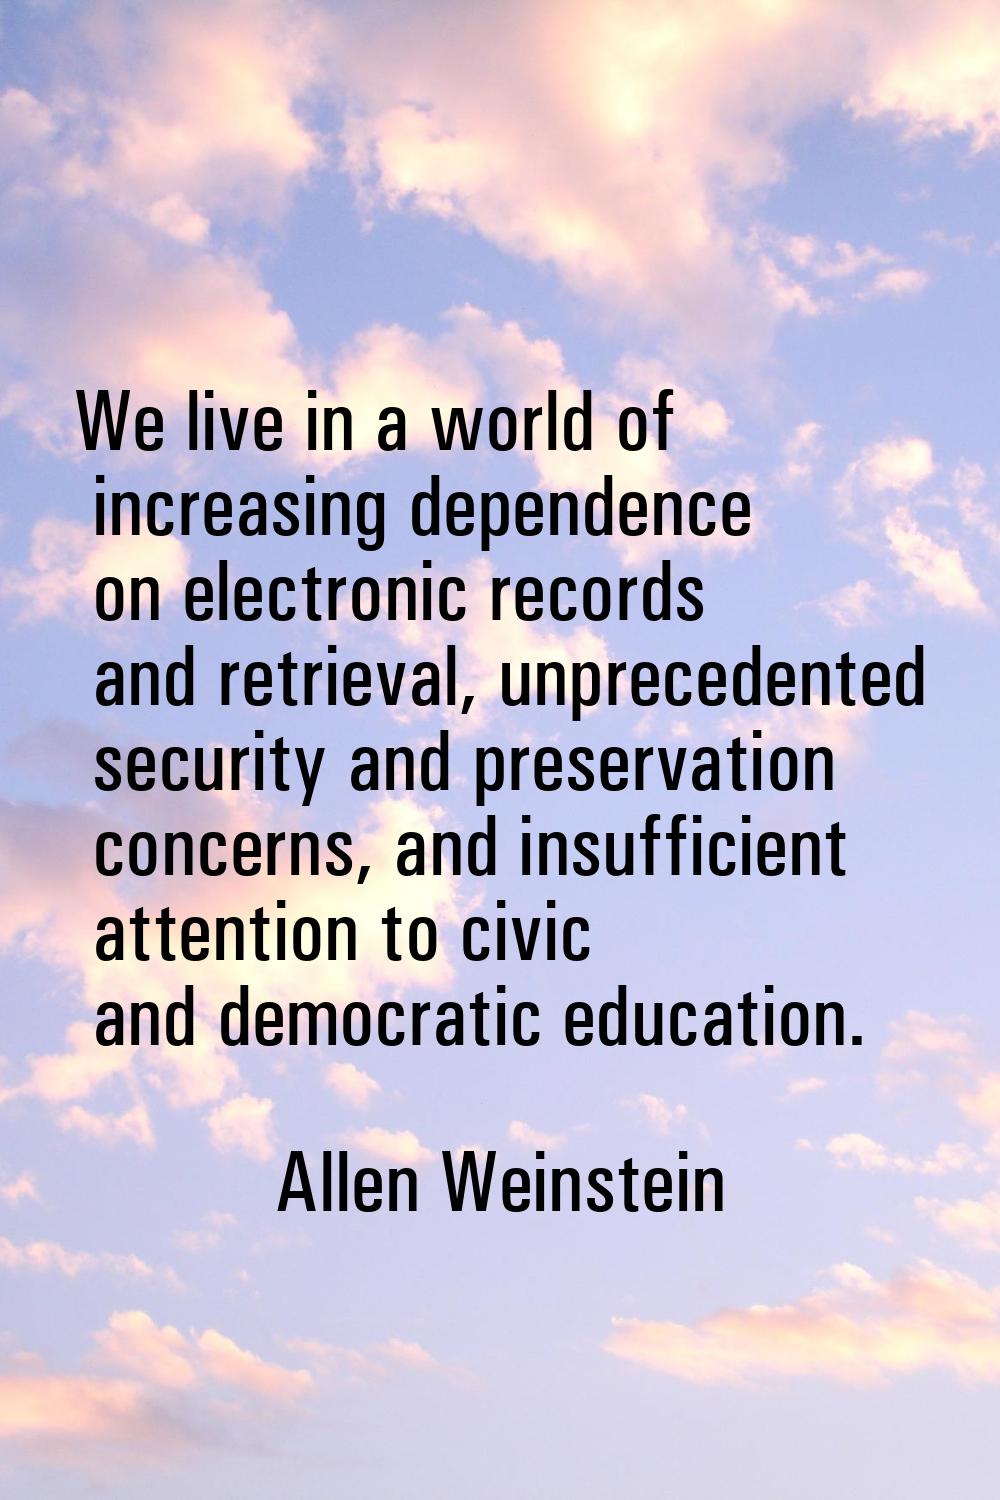 We live in a world of increasing dependence on electronic records and retrieval, unprecedented secu